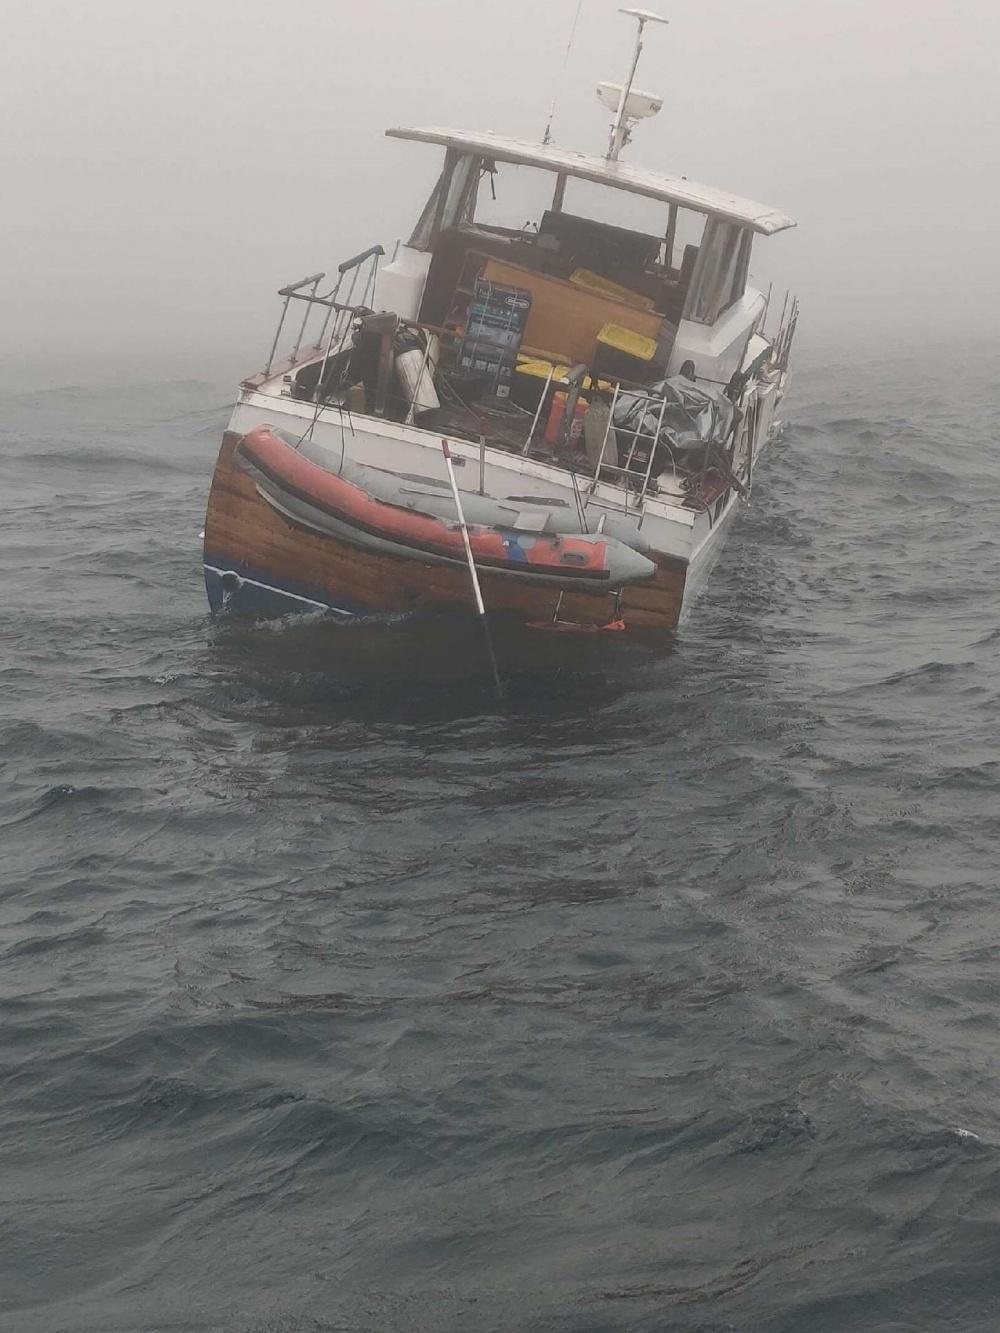 The pleasure craft Wooden Mistress takes on water 28 miles south of Eureka, Calif., Sept, 12, 2020. (<a href="https://content.govdelivery.com/accounts/USDHSCG/bulletins/2a06214">U.S. Coast Guard</a>)